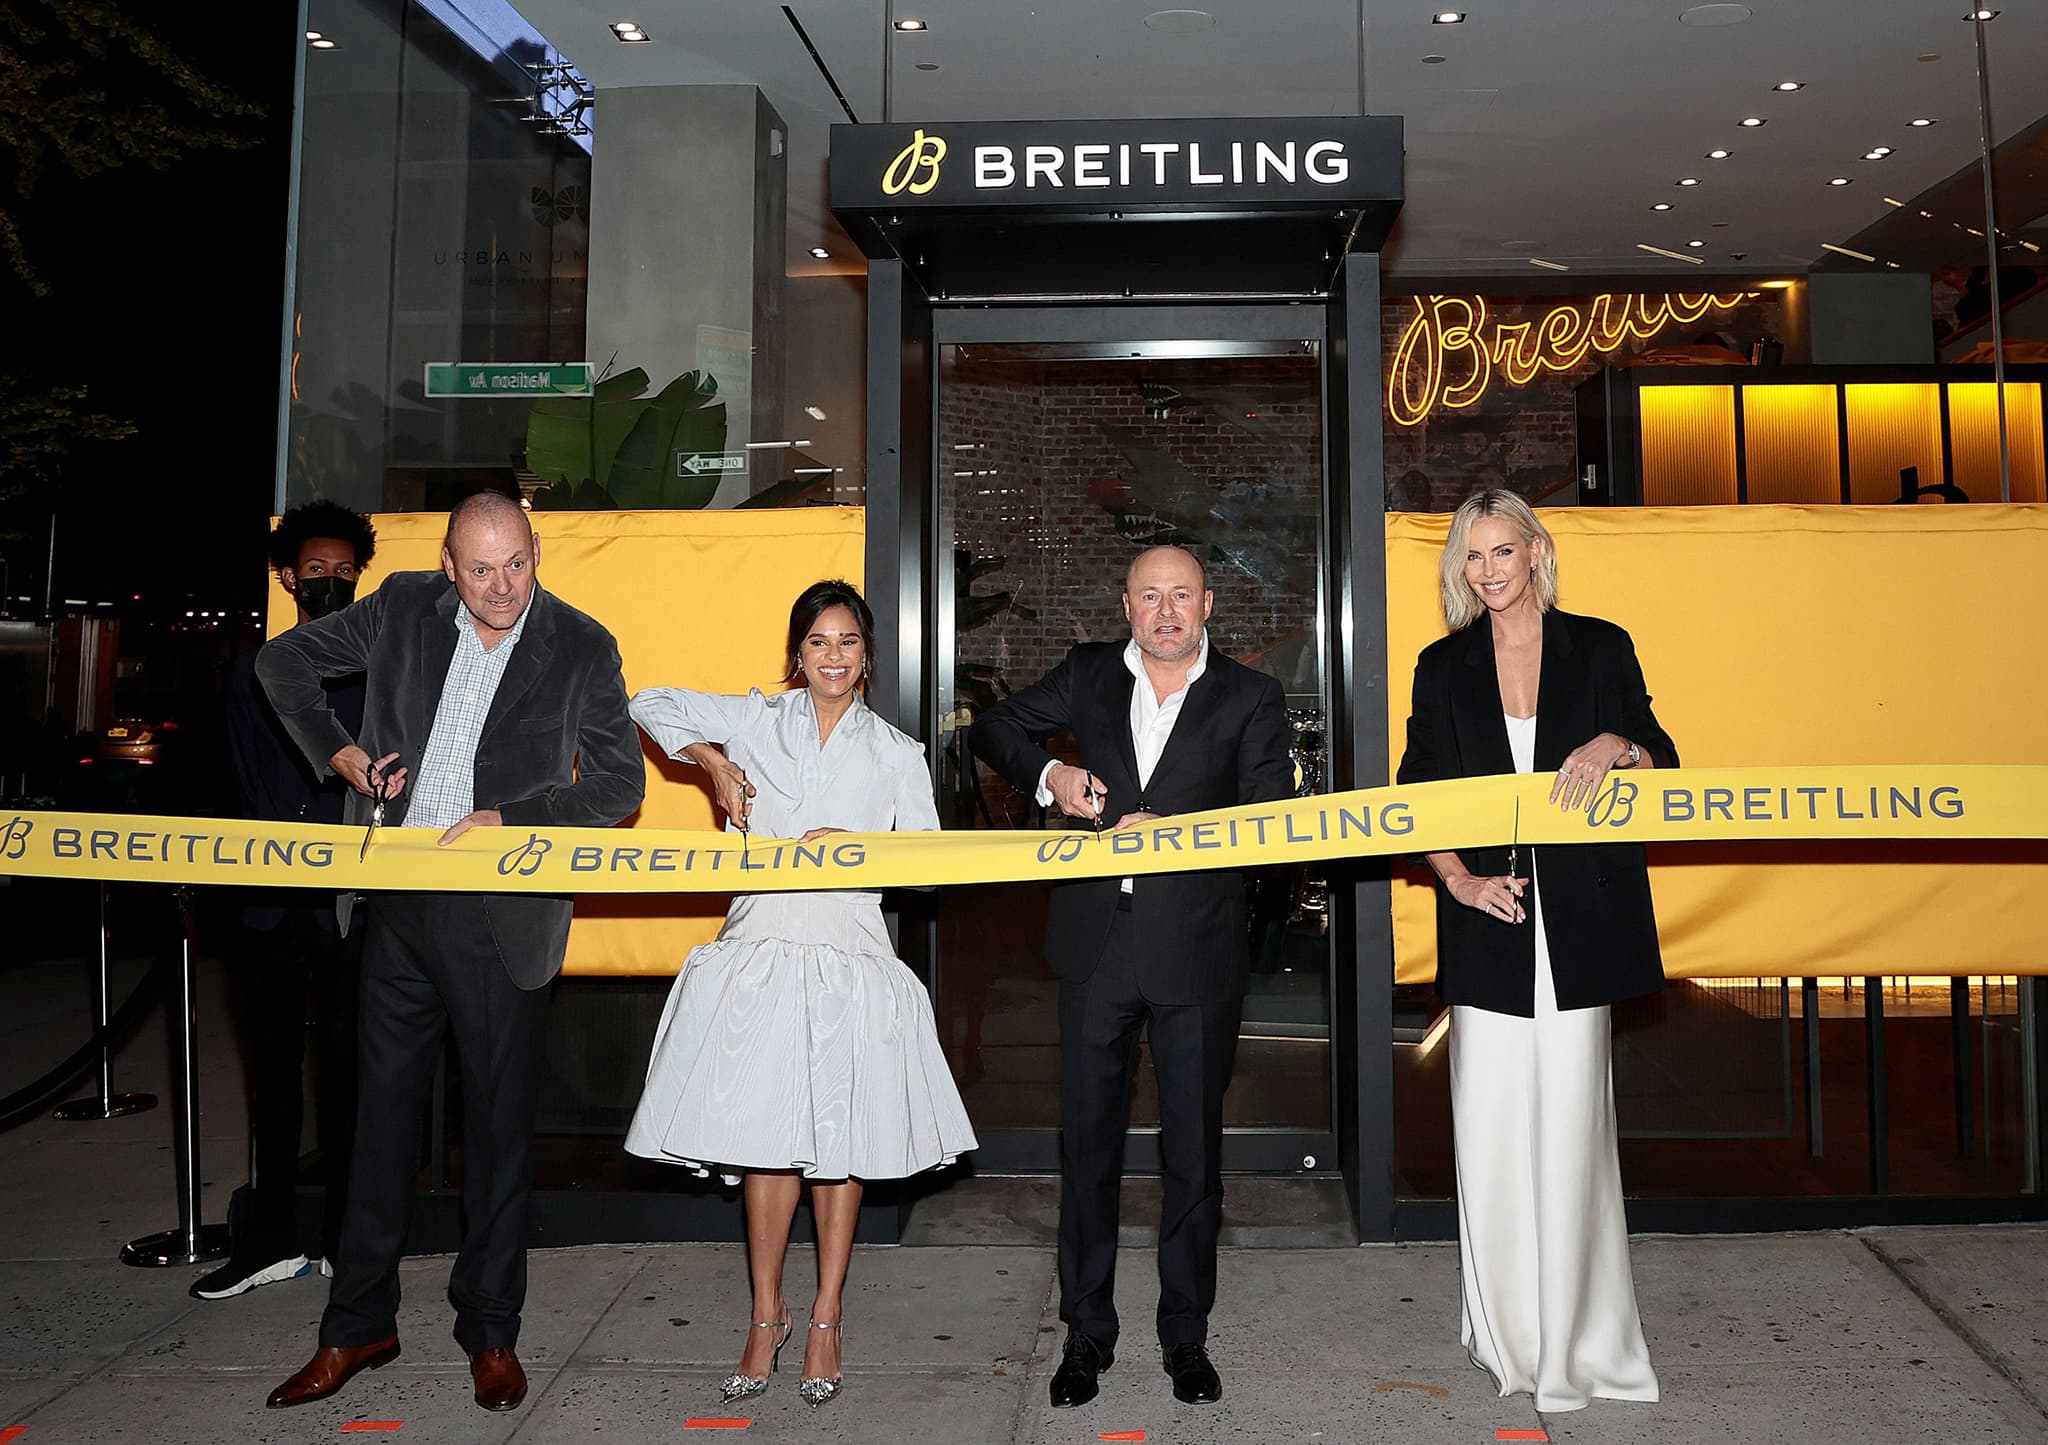 USA President for Breitling Thierry Prissert, Misty Copeland, CEO for Breitling Georges Kern, and Charlize Theron attend the Breitling Madison Avenue Grand Opening